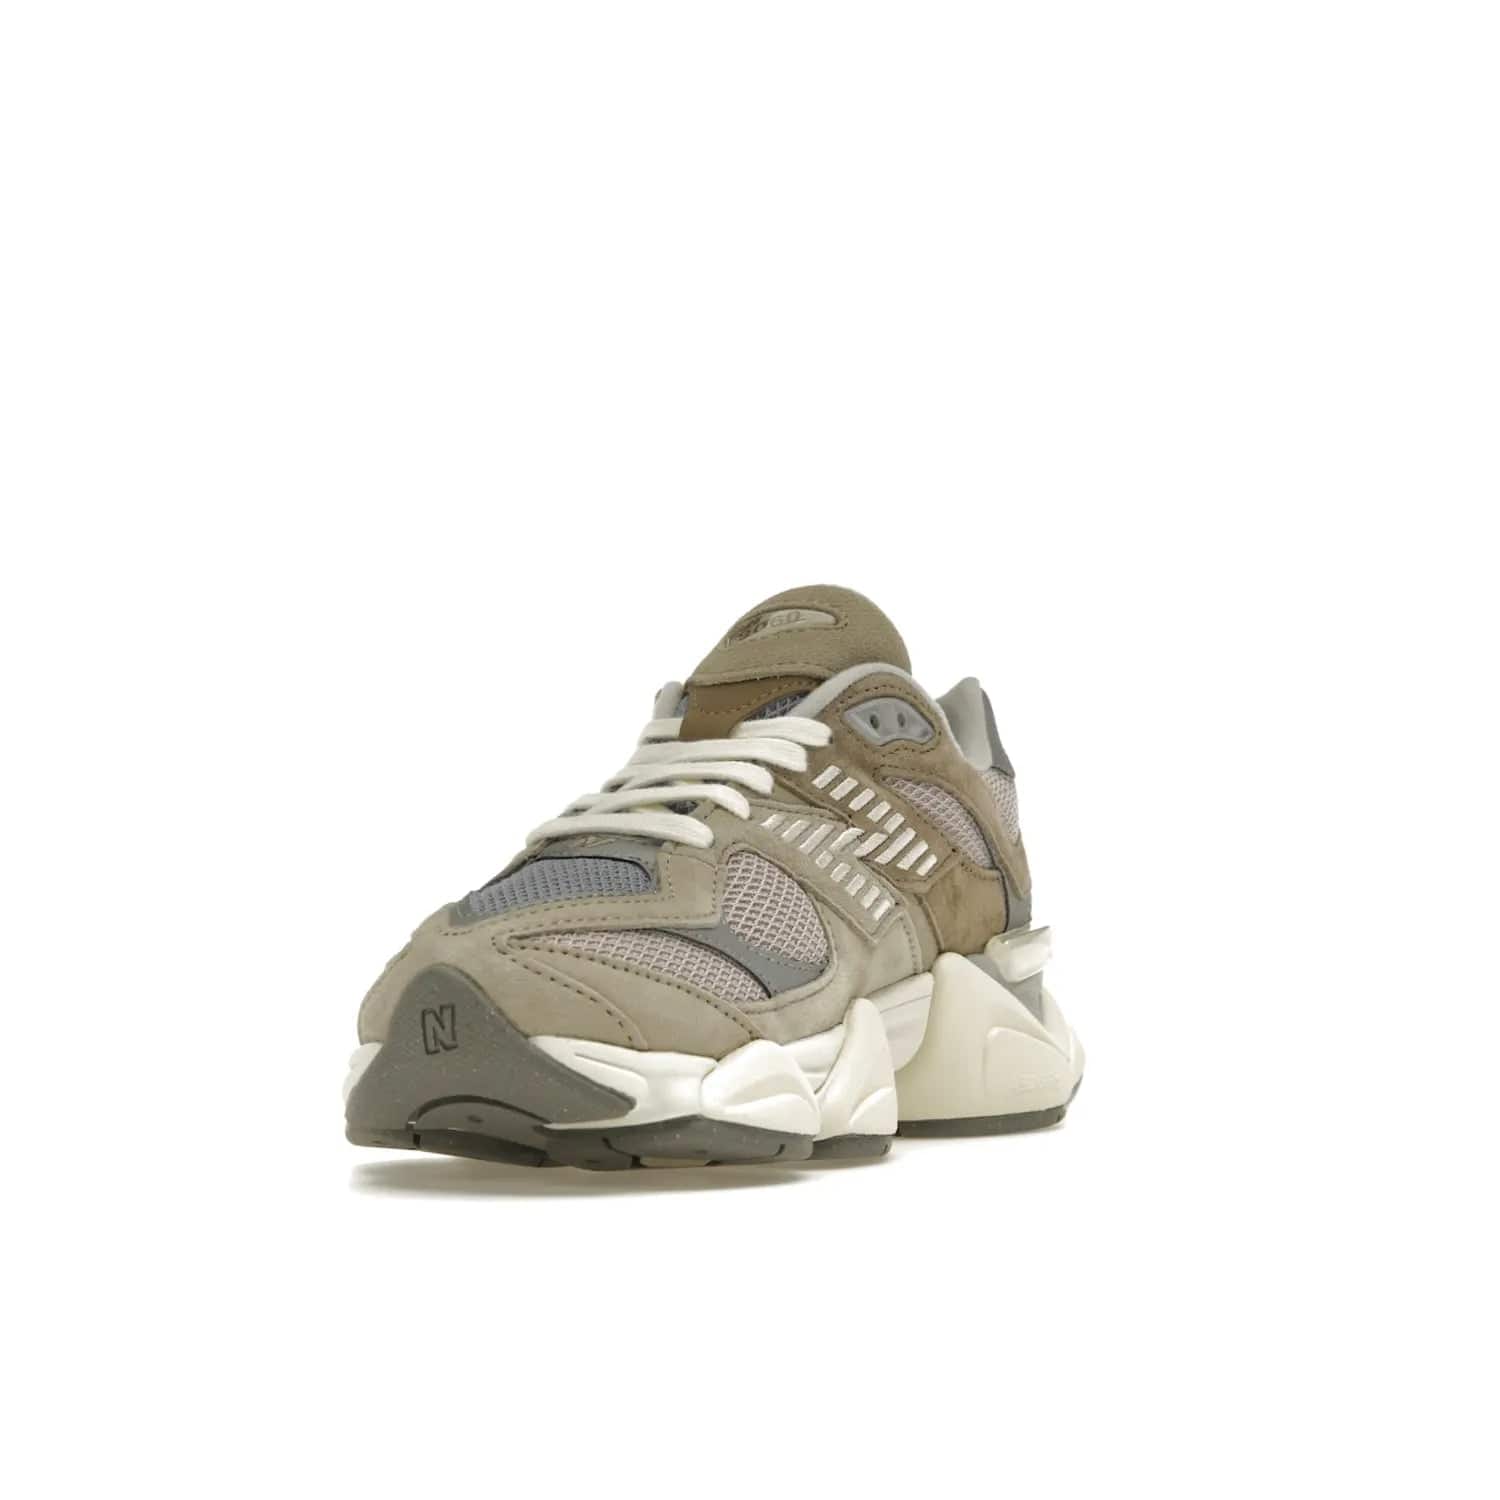 New Balance 9060 Mushroom - Image 13 - Only at www.BallersClubKickz.com - Get the New Balance 9060 Mushroom in stylish aluminum and mushroom tones. Featuring a porous mesh fabric with multiple suede overlays, a grey N symbol and rugged off-white/grey sole. Shop now and make a statement.